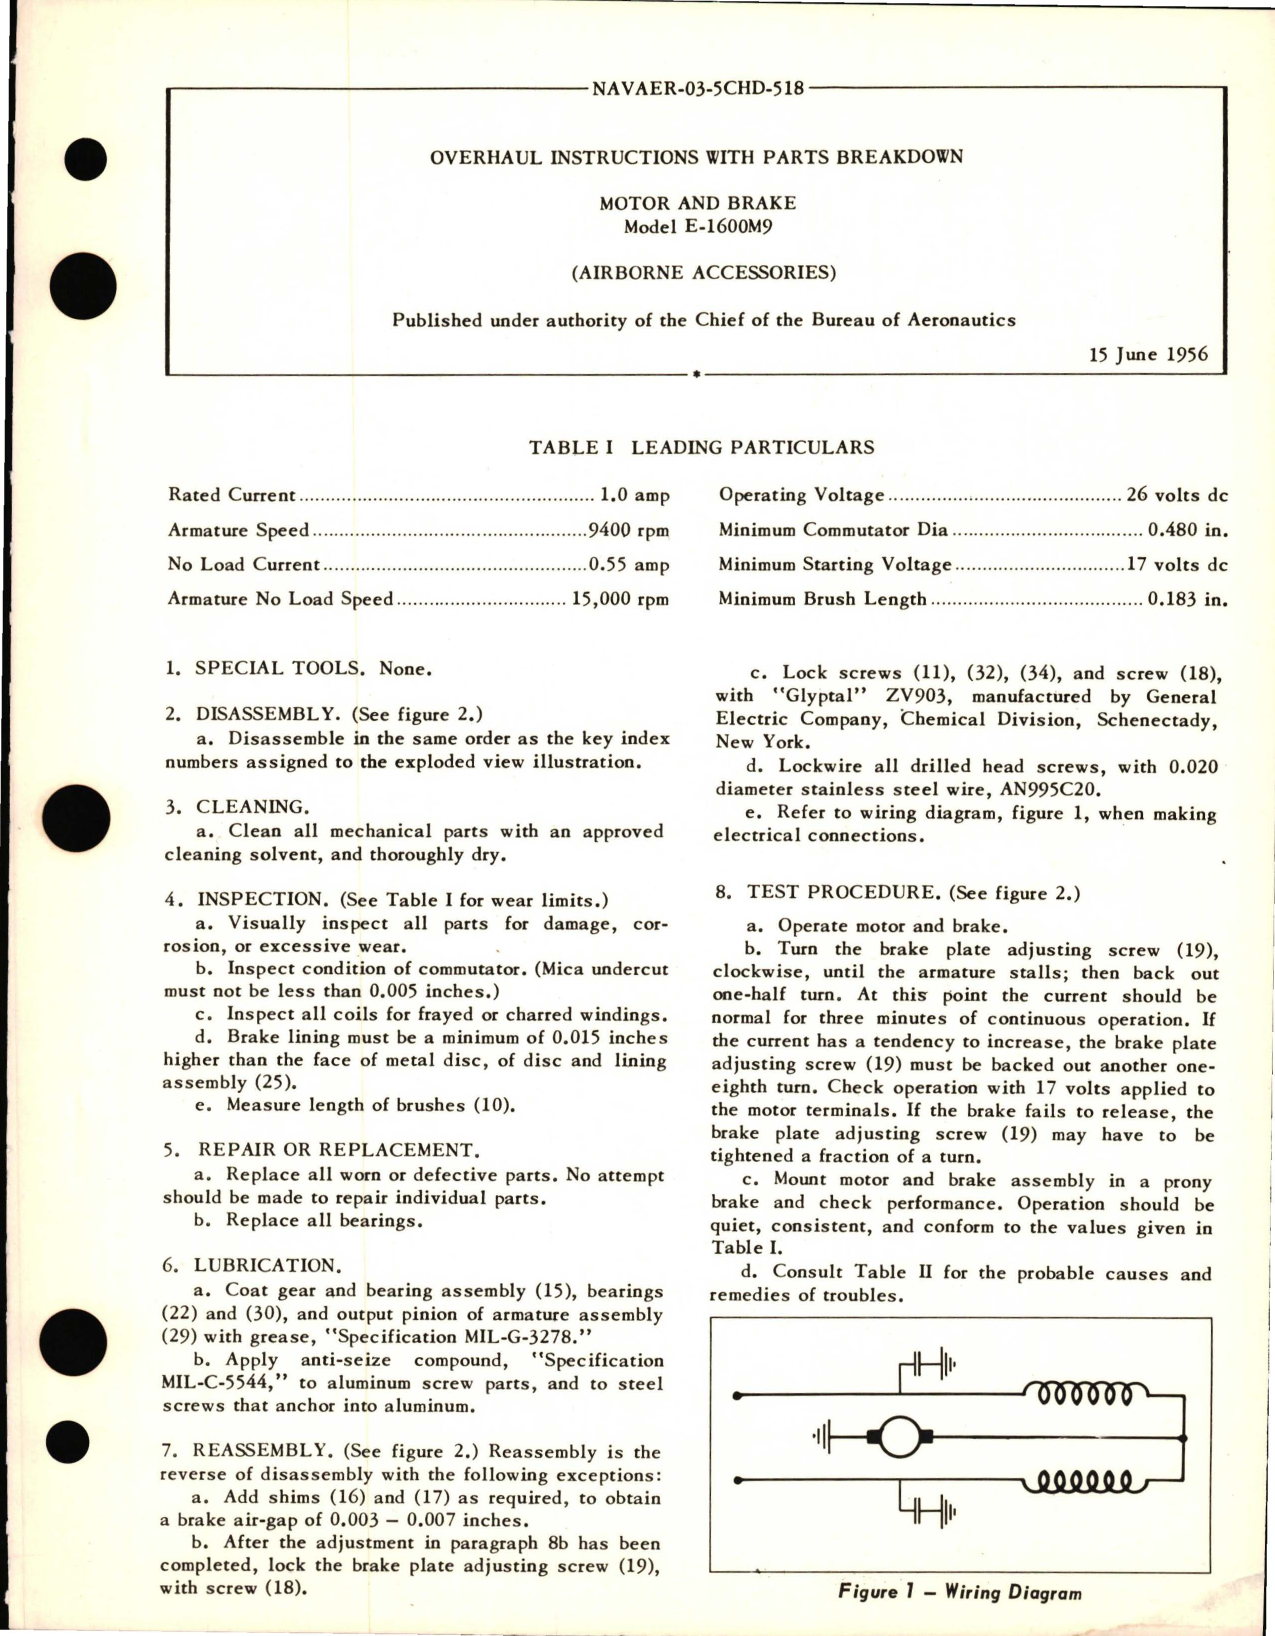 Sample page 1 from AirCorps Library document: Overhaul Instructions with Parts Breakdown for Motor and Brake Model E-1600M9 